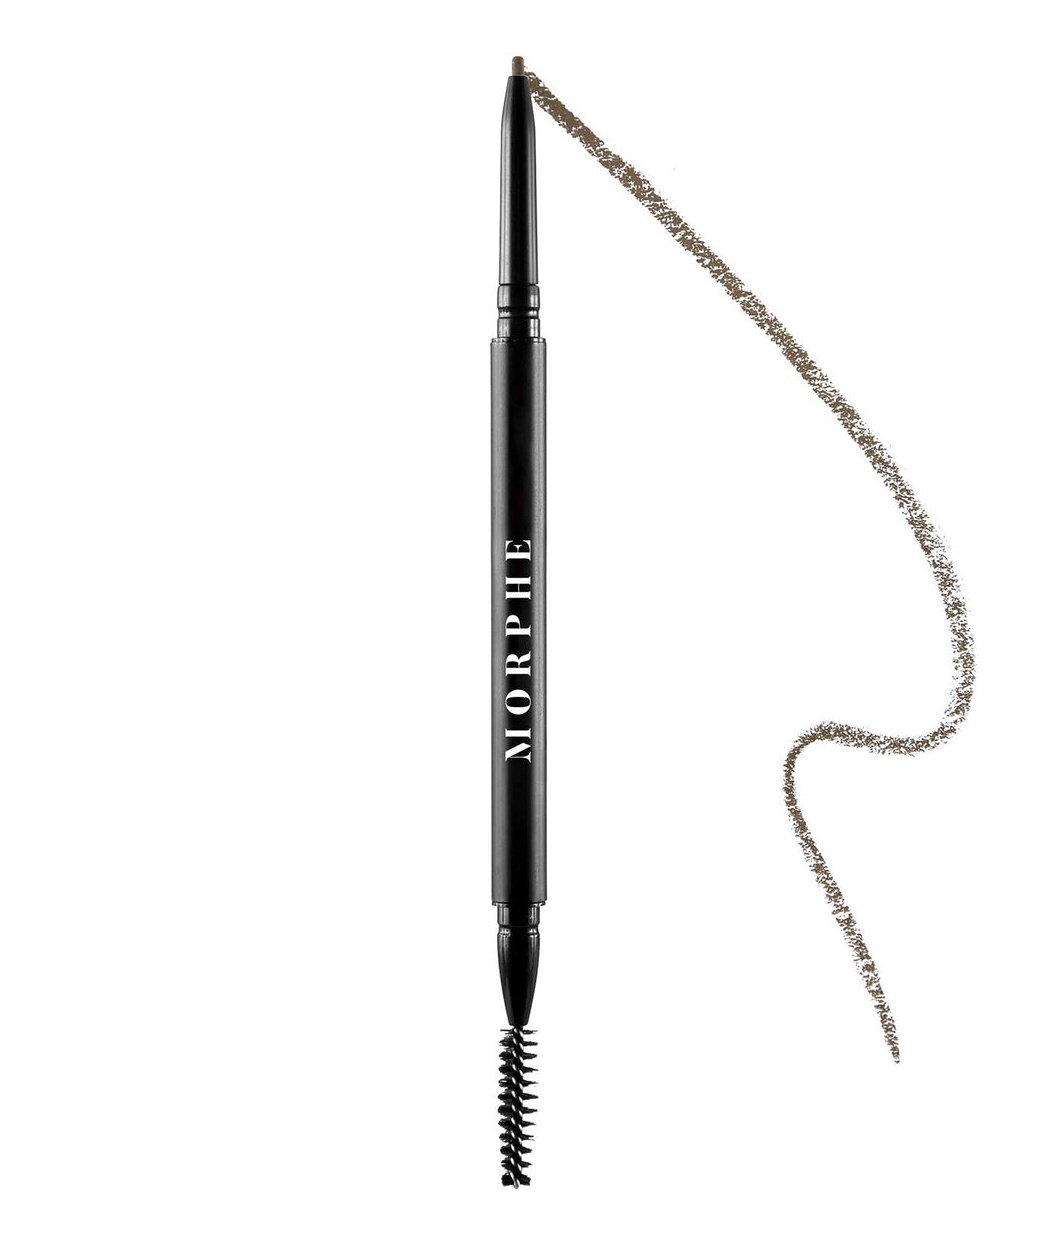 Morphe Micro Brow Dual-ended Pencil & Spoolie - Chocolate Mousse